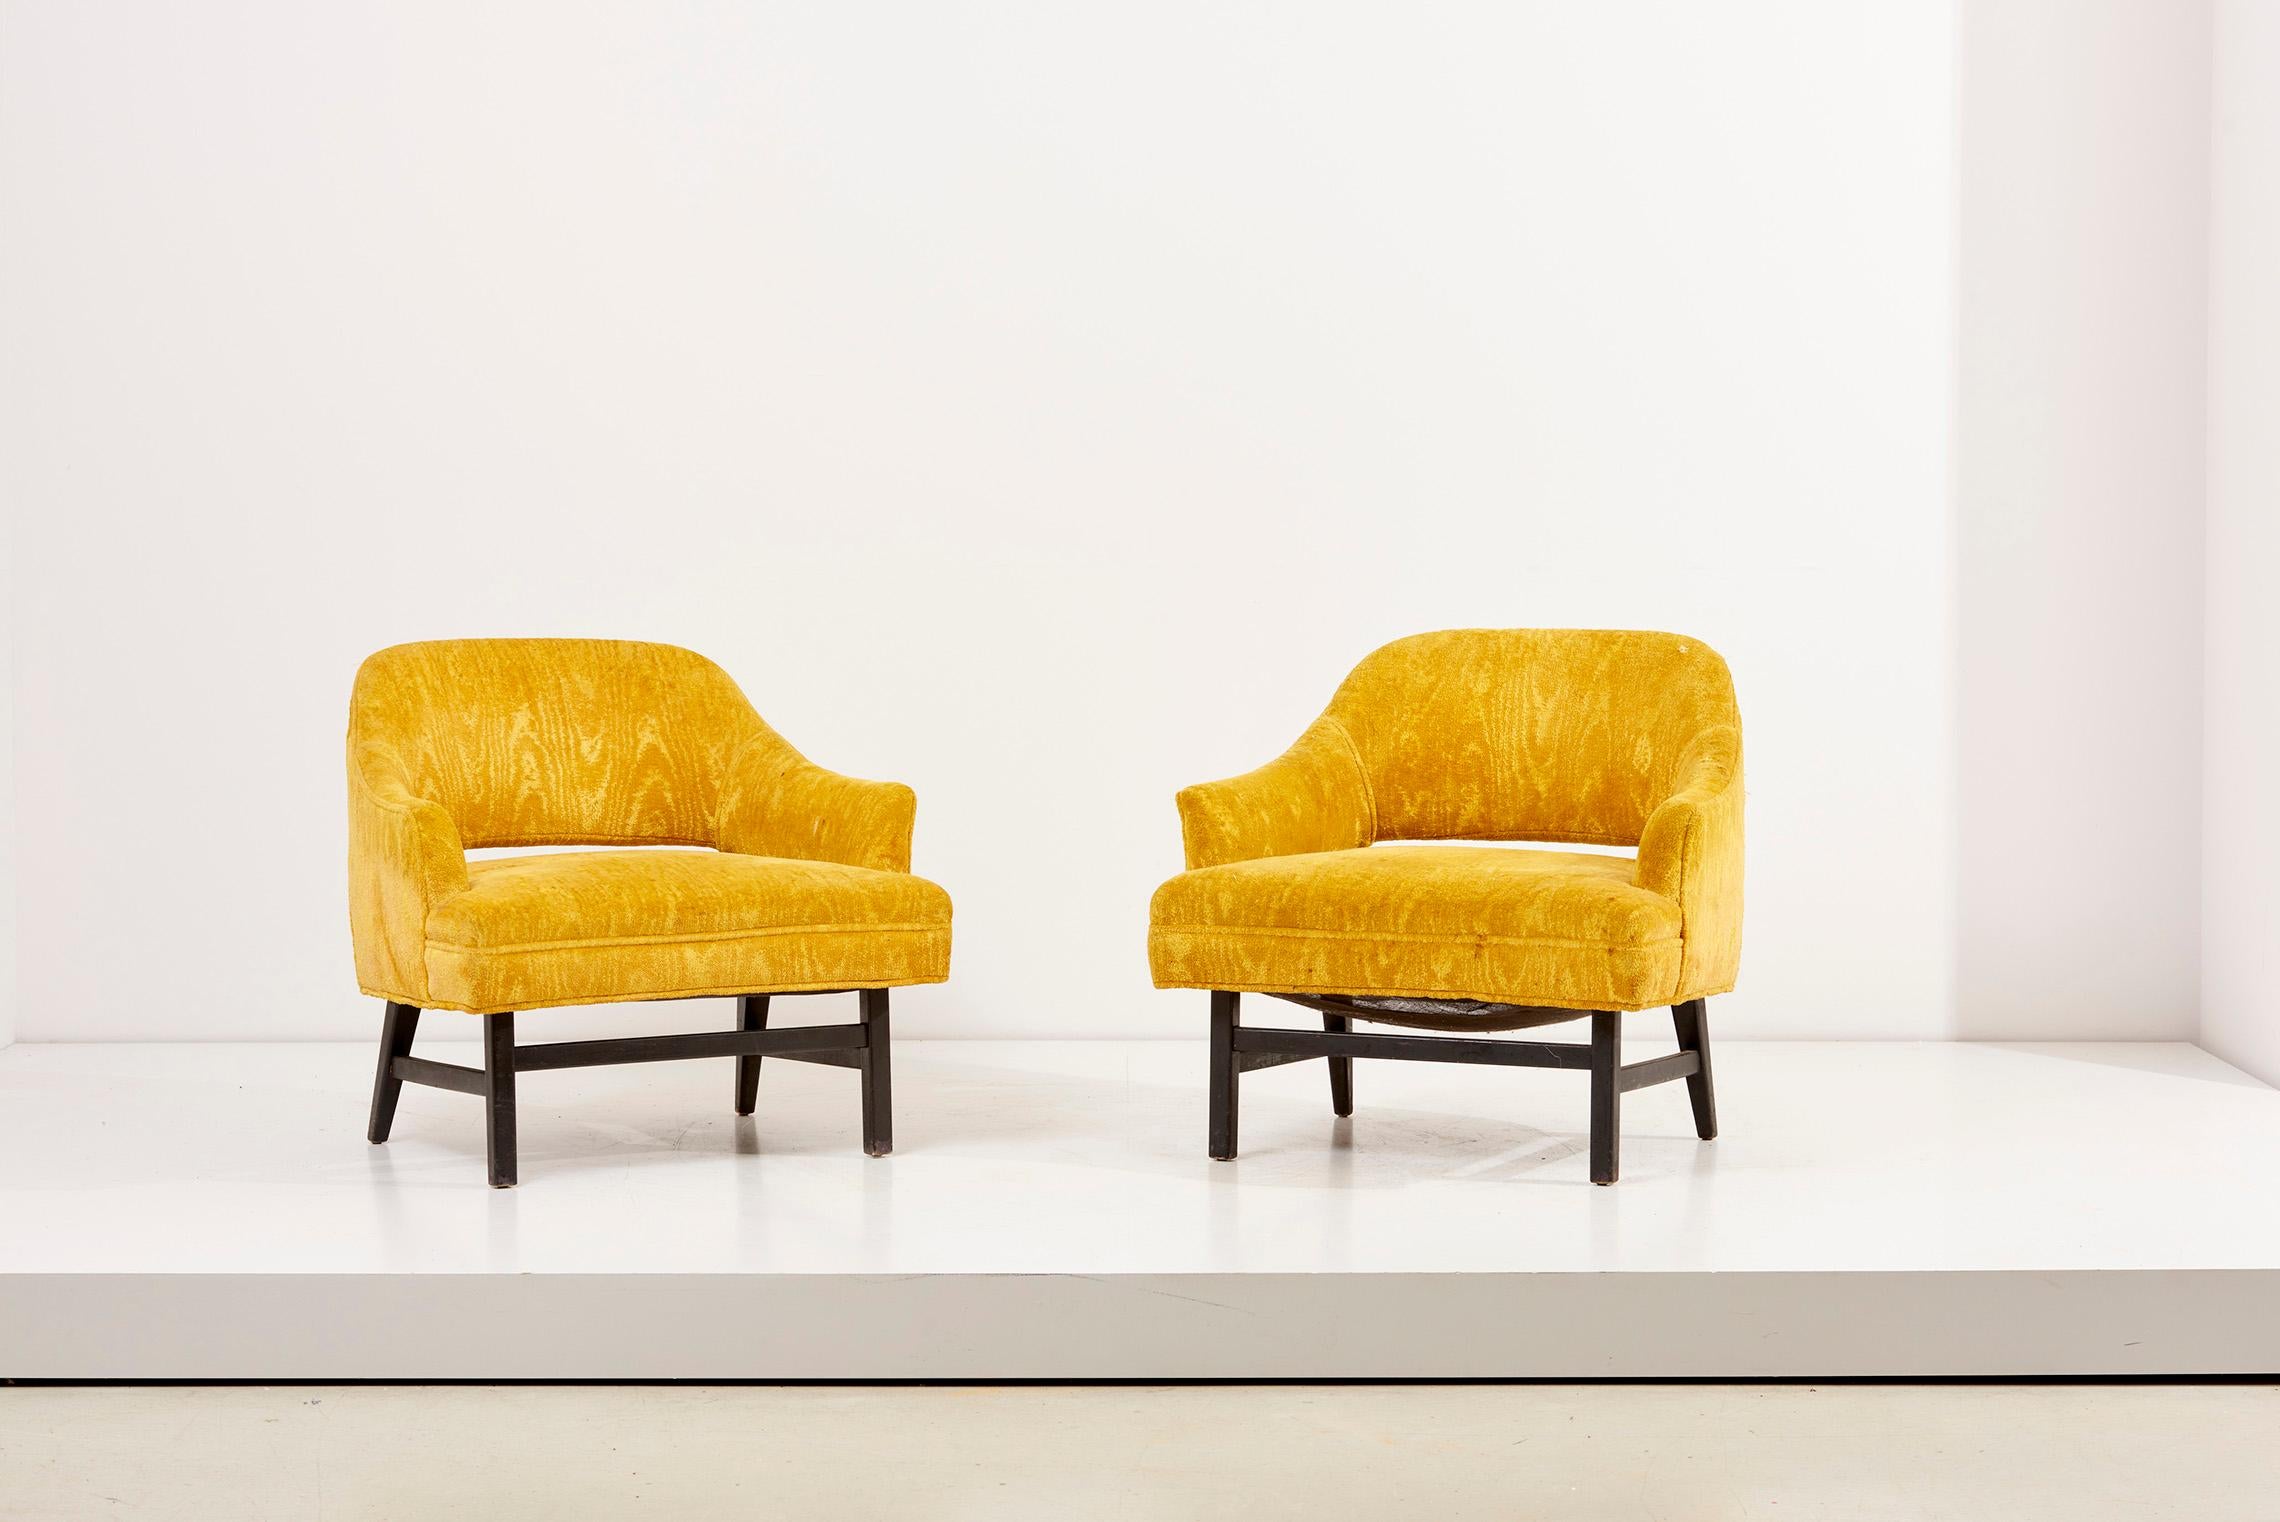 Pair of Harvey Probber lounge chairs in yellow upholstery. 
The chairs have vintage upholstery.